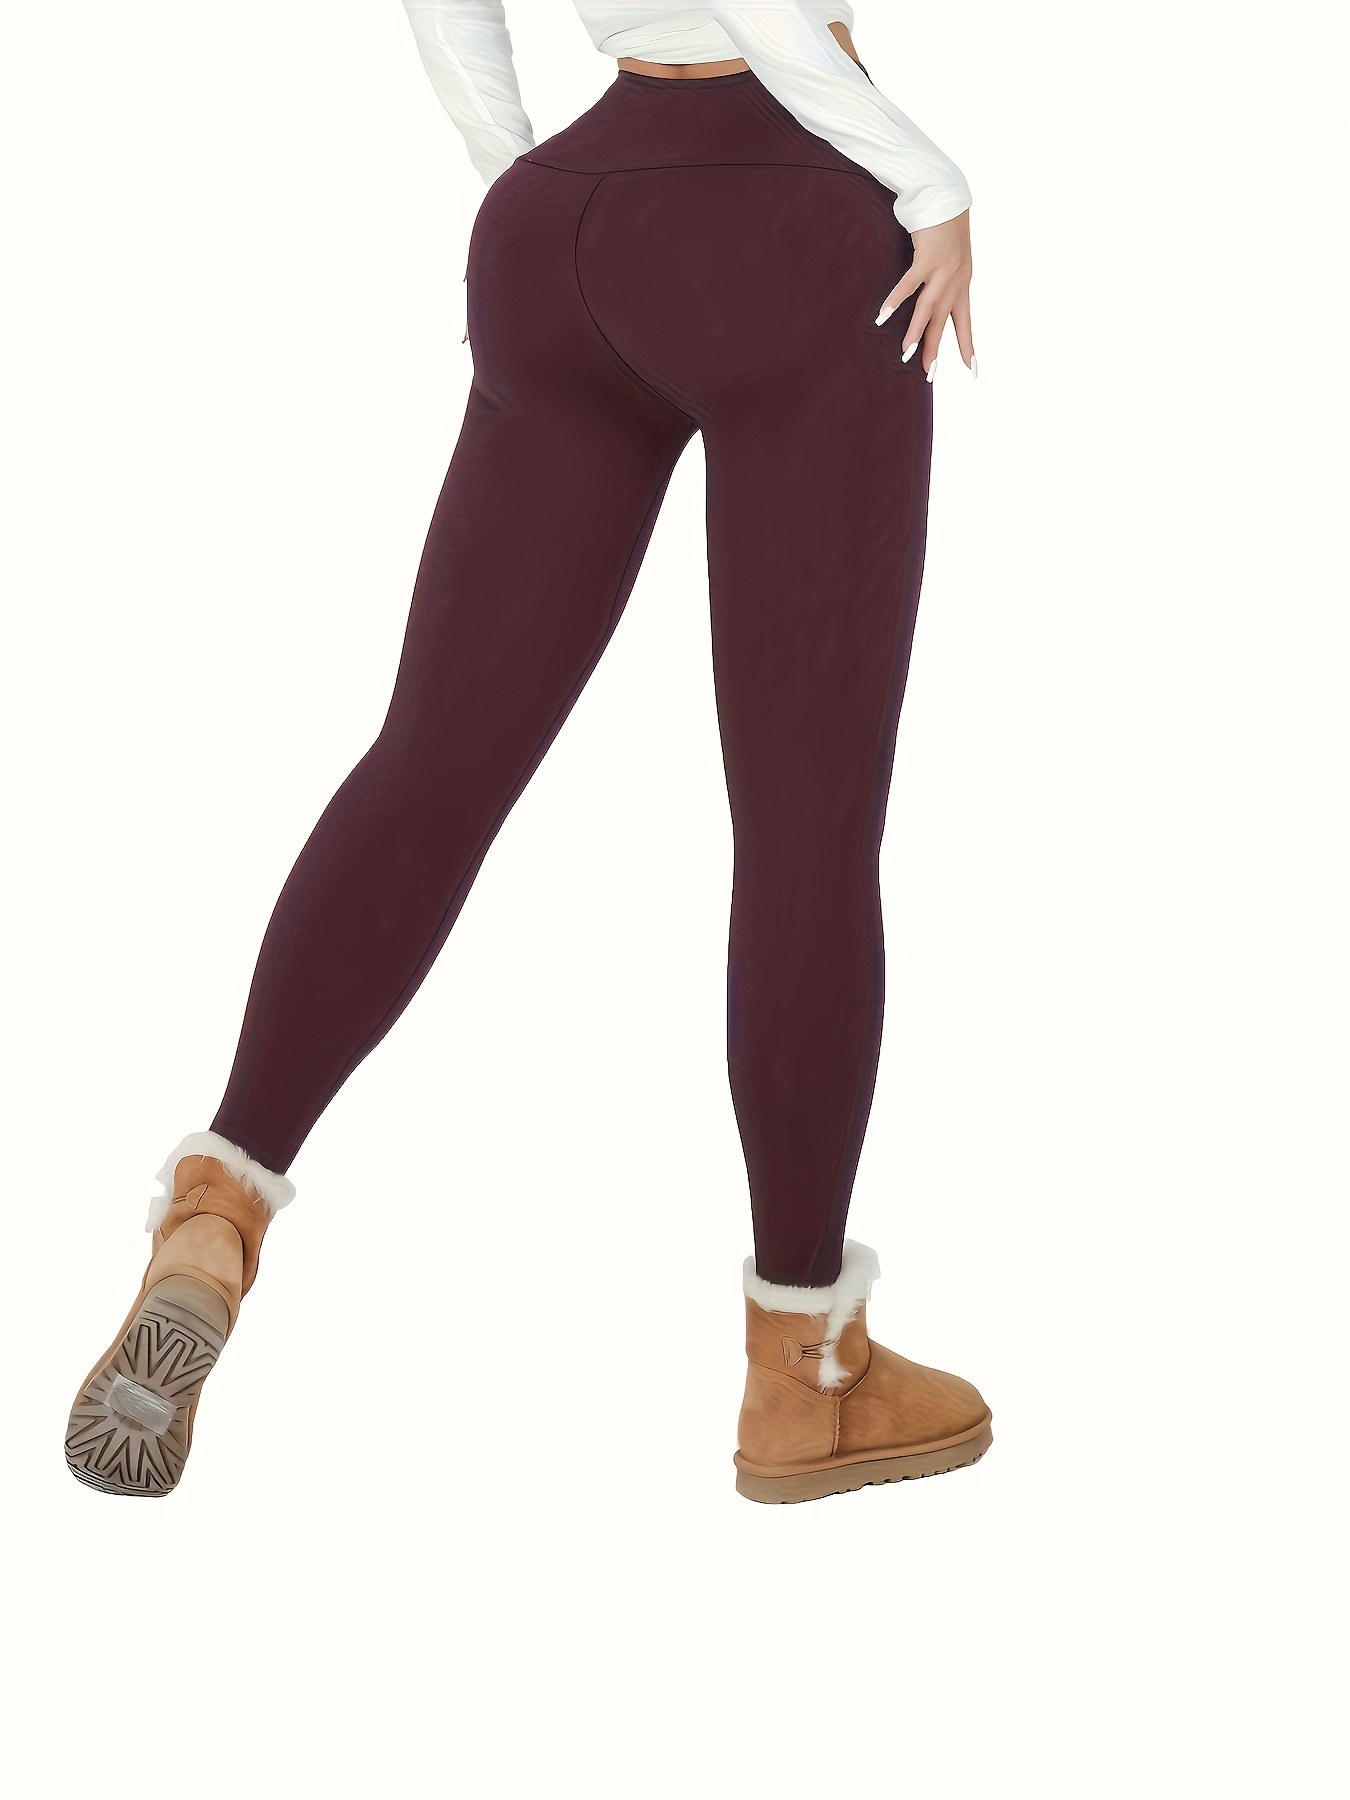 UK STRETCHY LADIES Winter Thick Leggings Pants Fleece Lined Thermal Warm  Soft MC £10.99 - PicClick UK